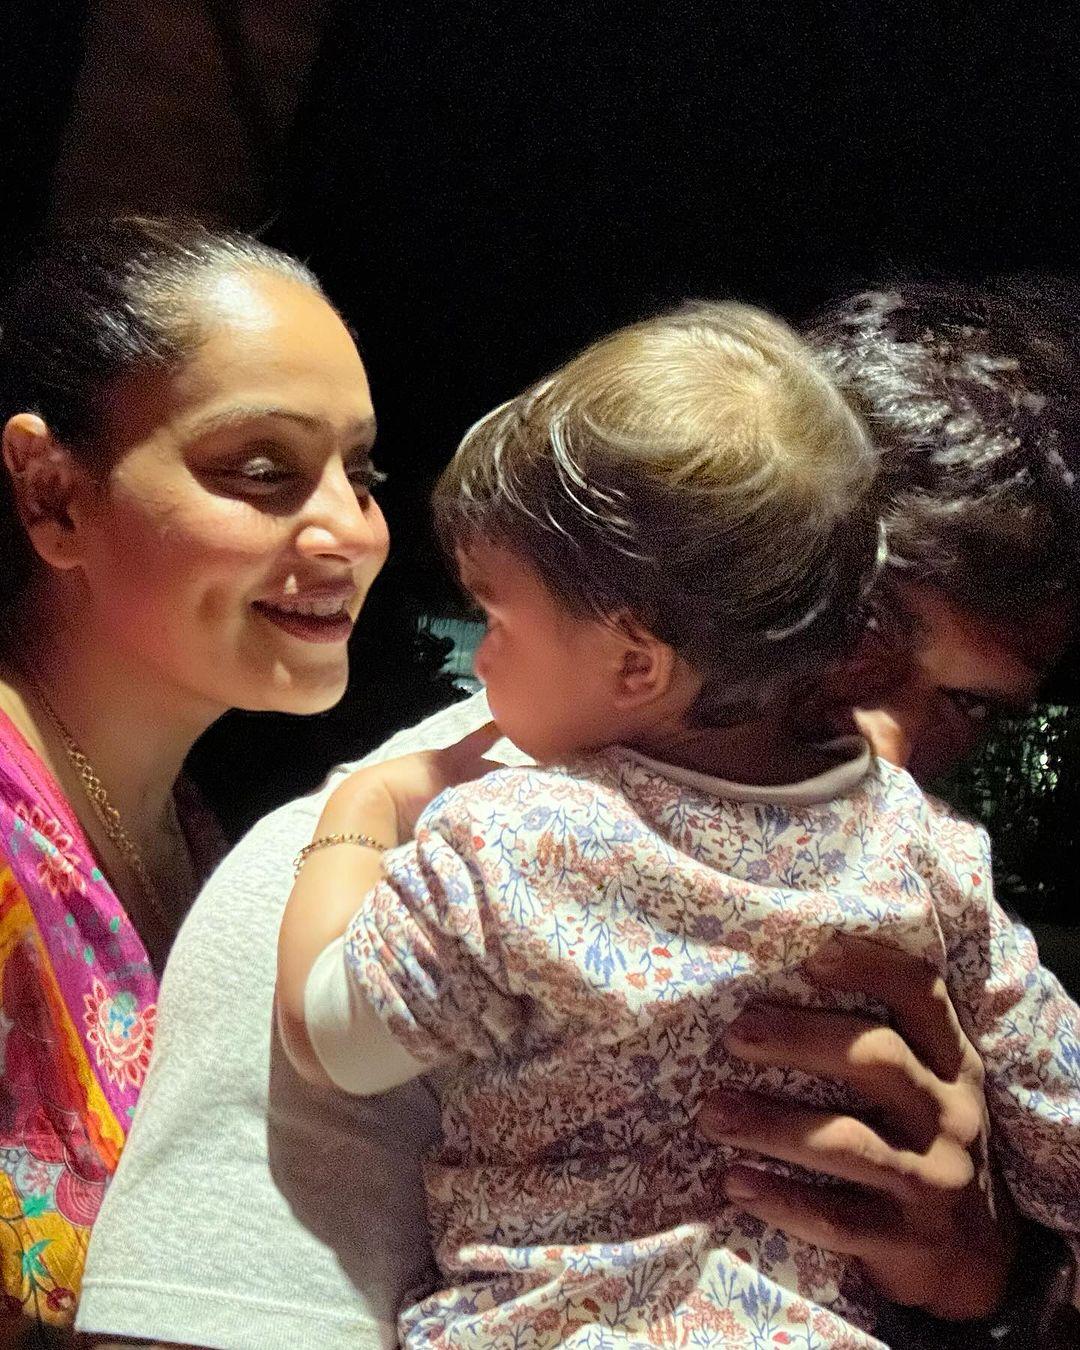 Bipasha and Karan welcomed their daughter Devi in November 2022. Bipasha had shared this photo some weeks ago